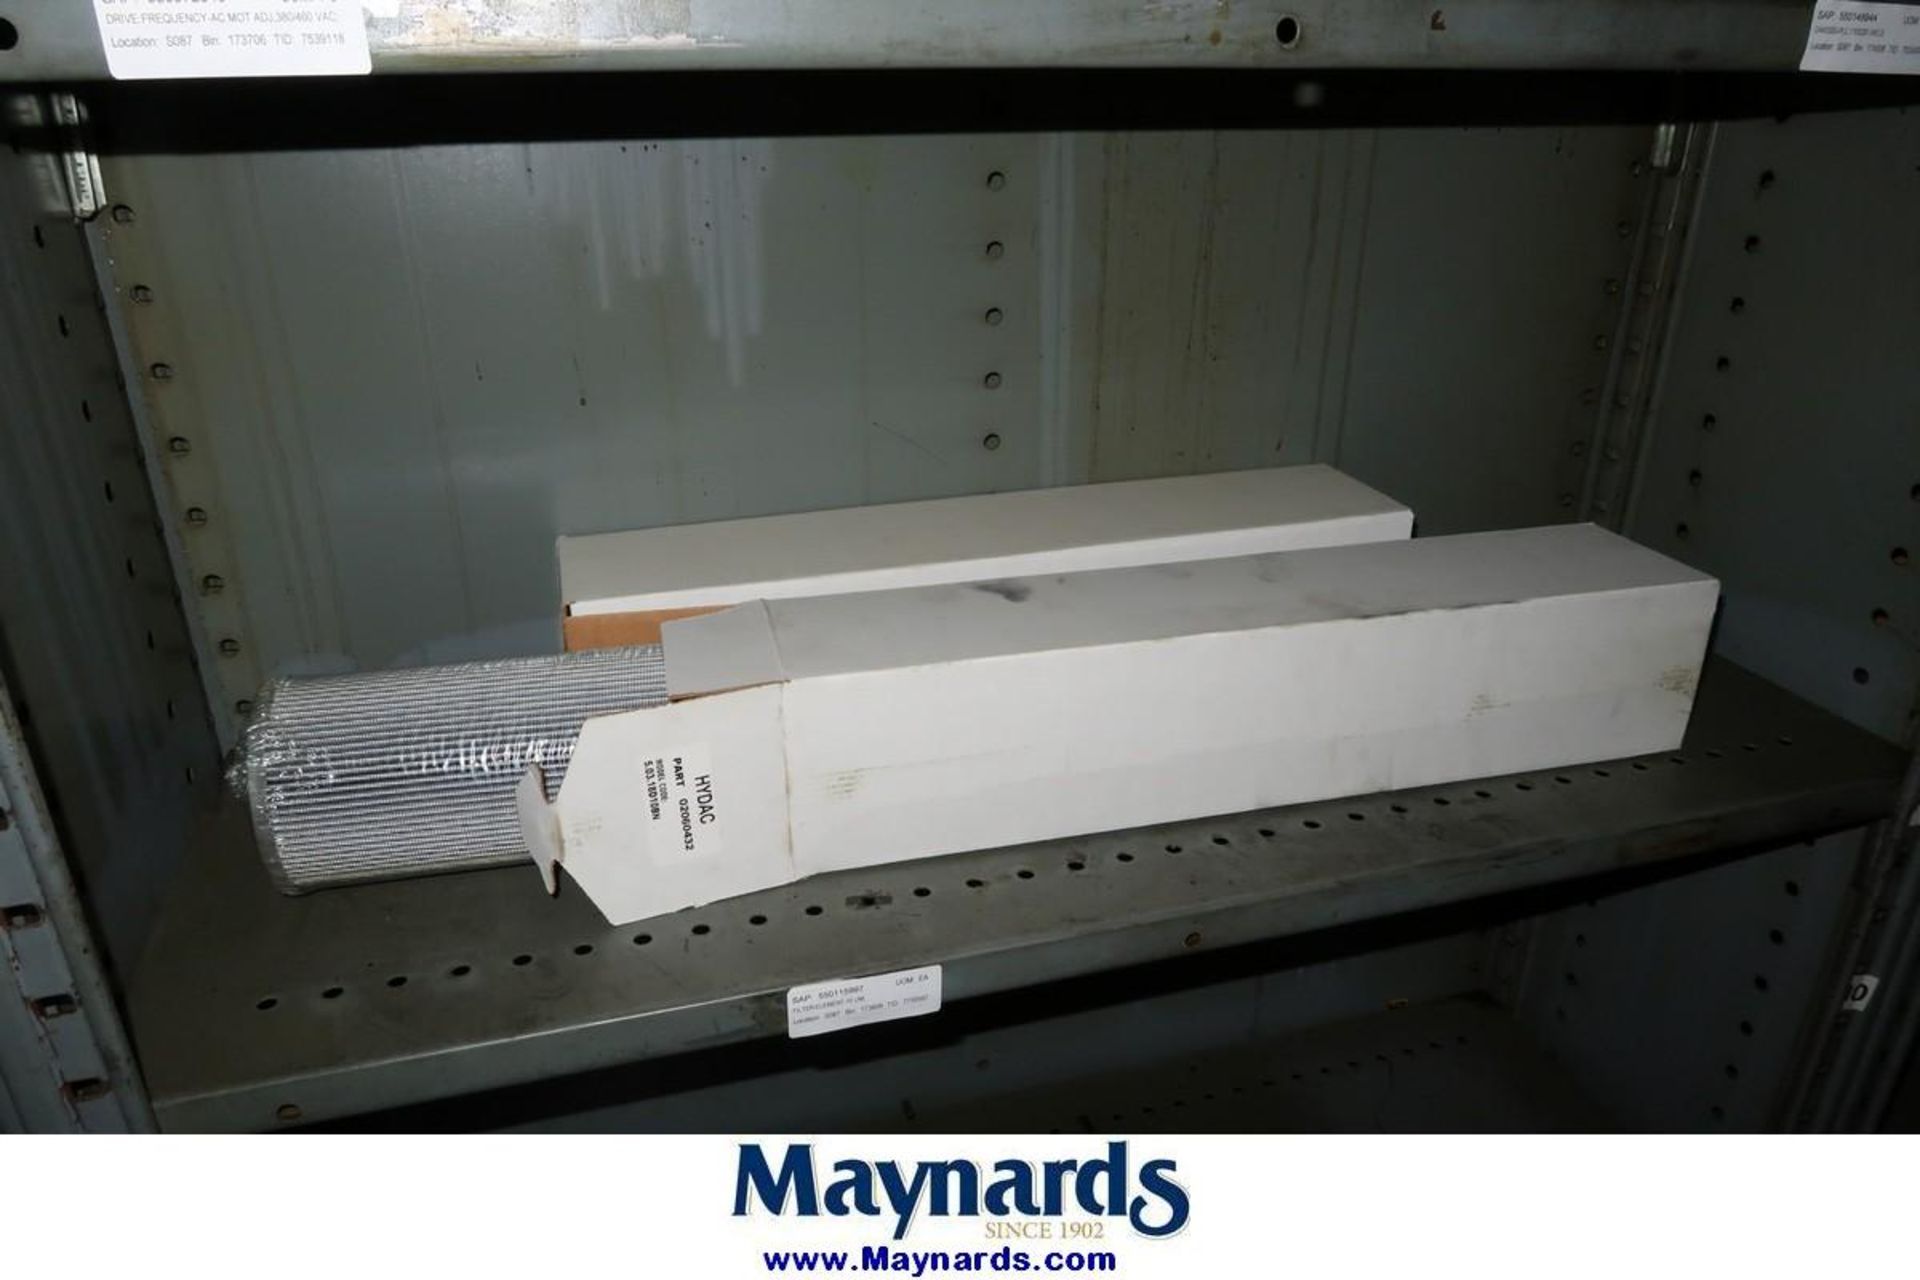 Adjustable Shelving Units with Contents of Spare Parts - Image 19 of 21